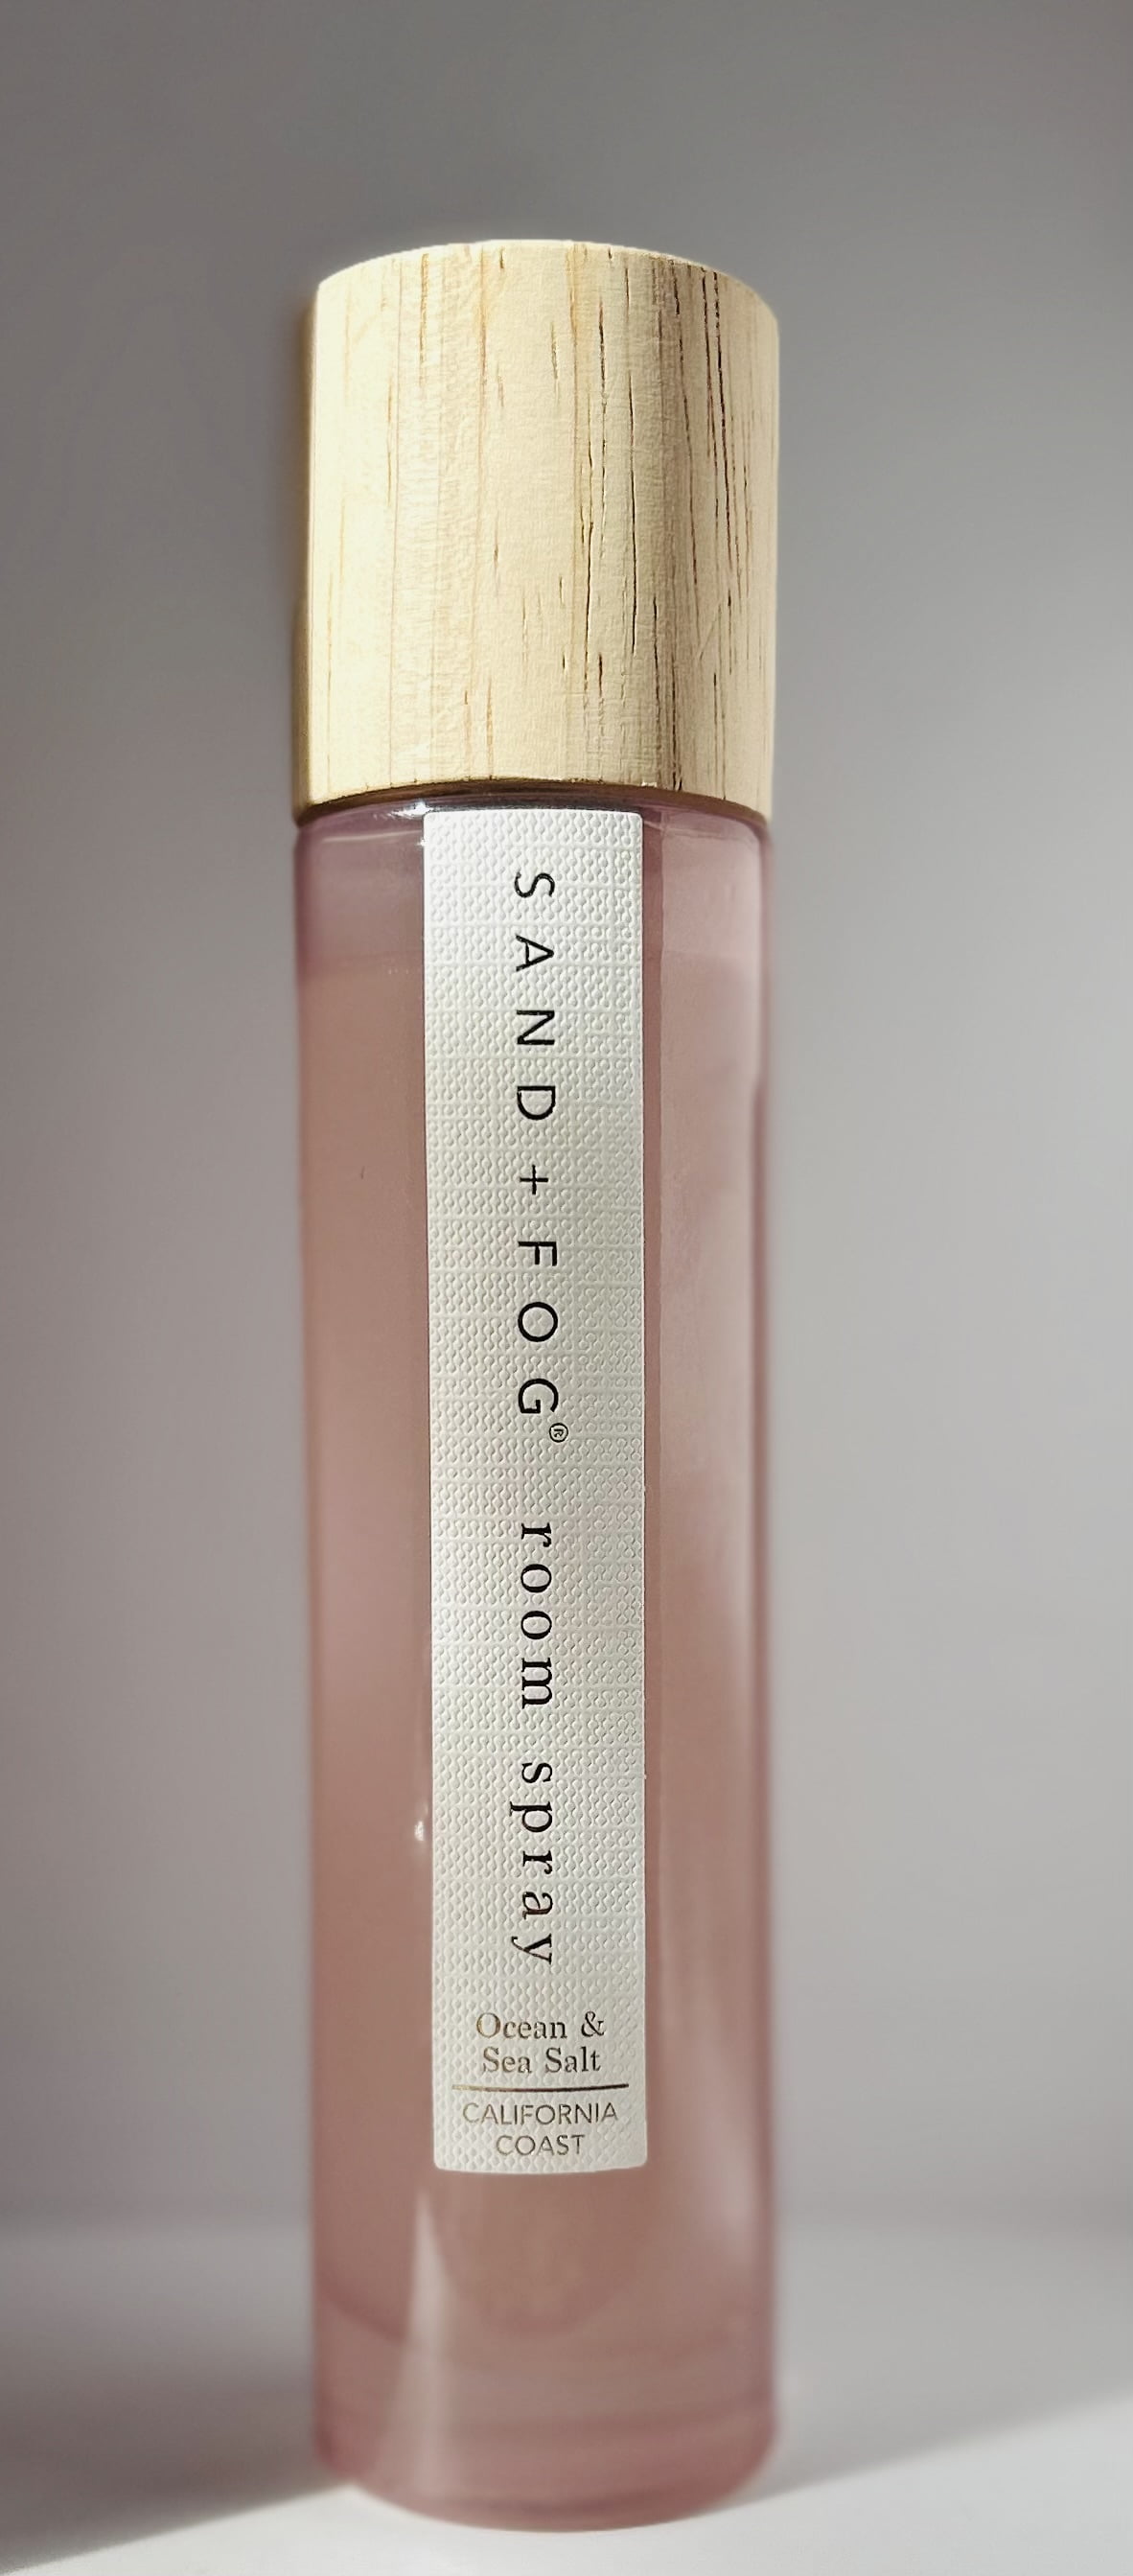 Vanilla Musk by Sand + Fog » Reviews & Perfume Facts